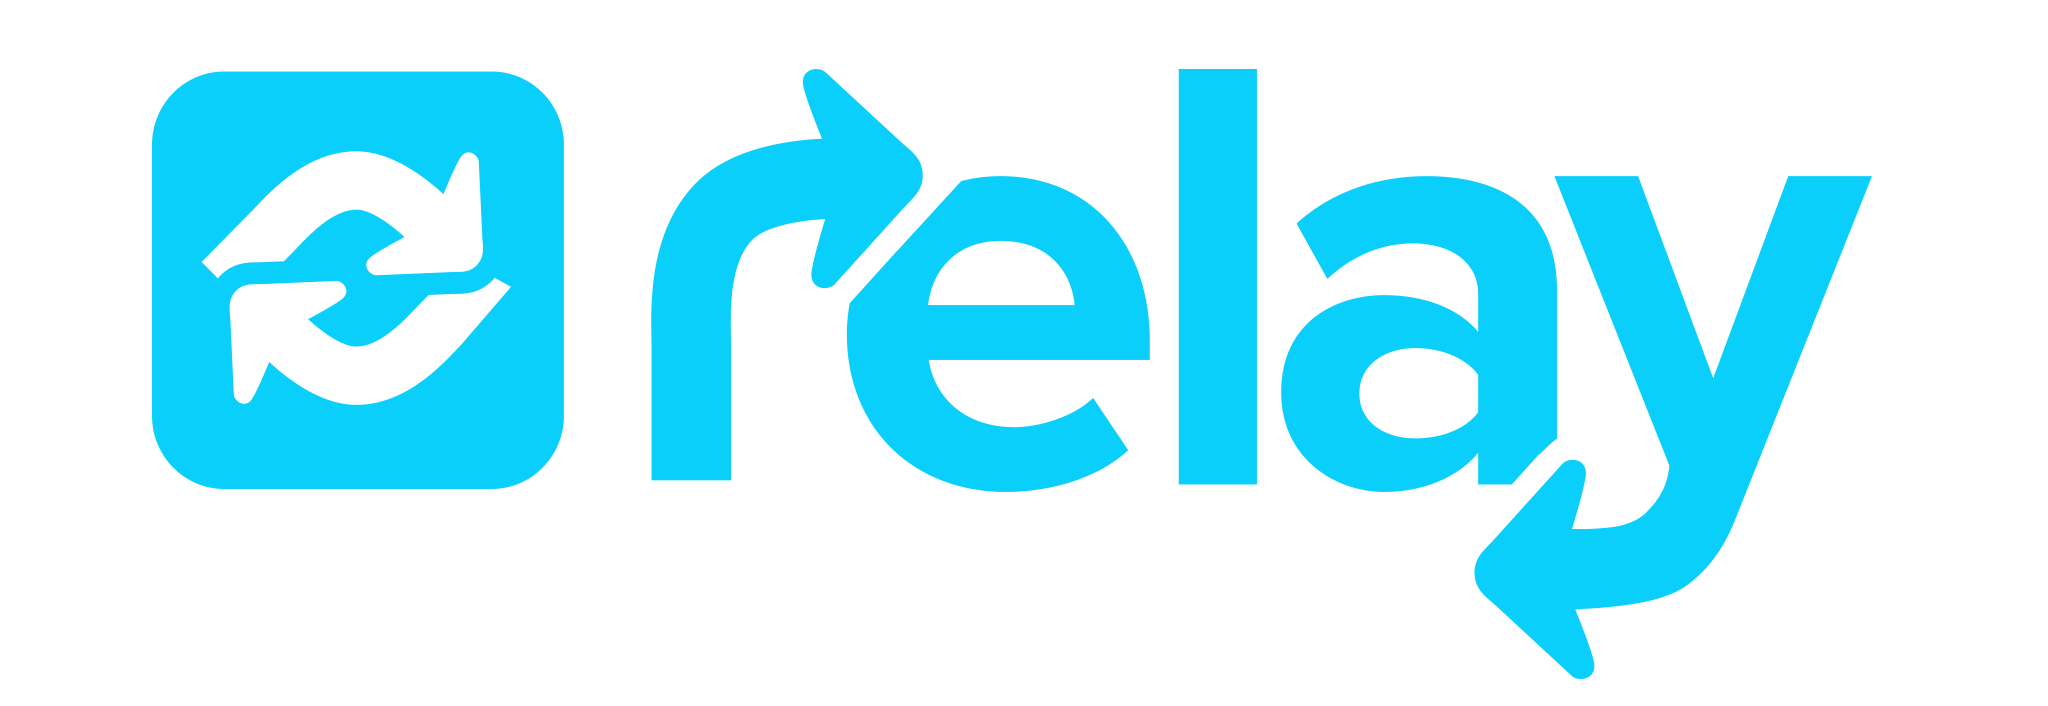 Relay Logo - Mobile Messaging App Relay Raises $700,000 To Share Web Videos And ...